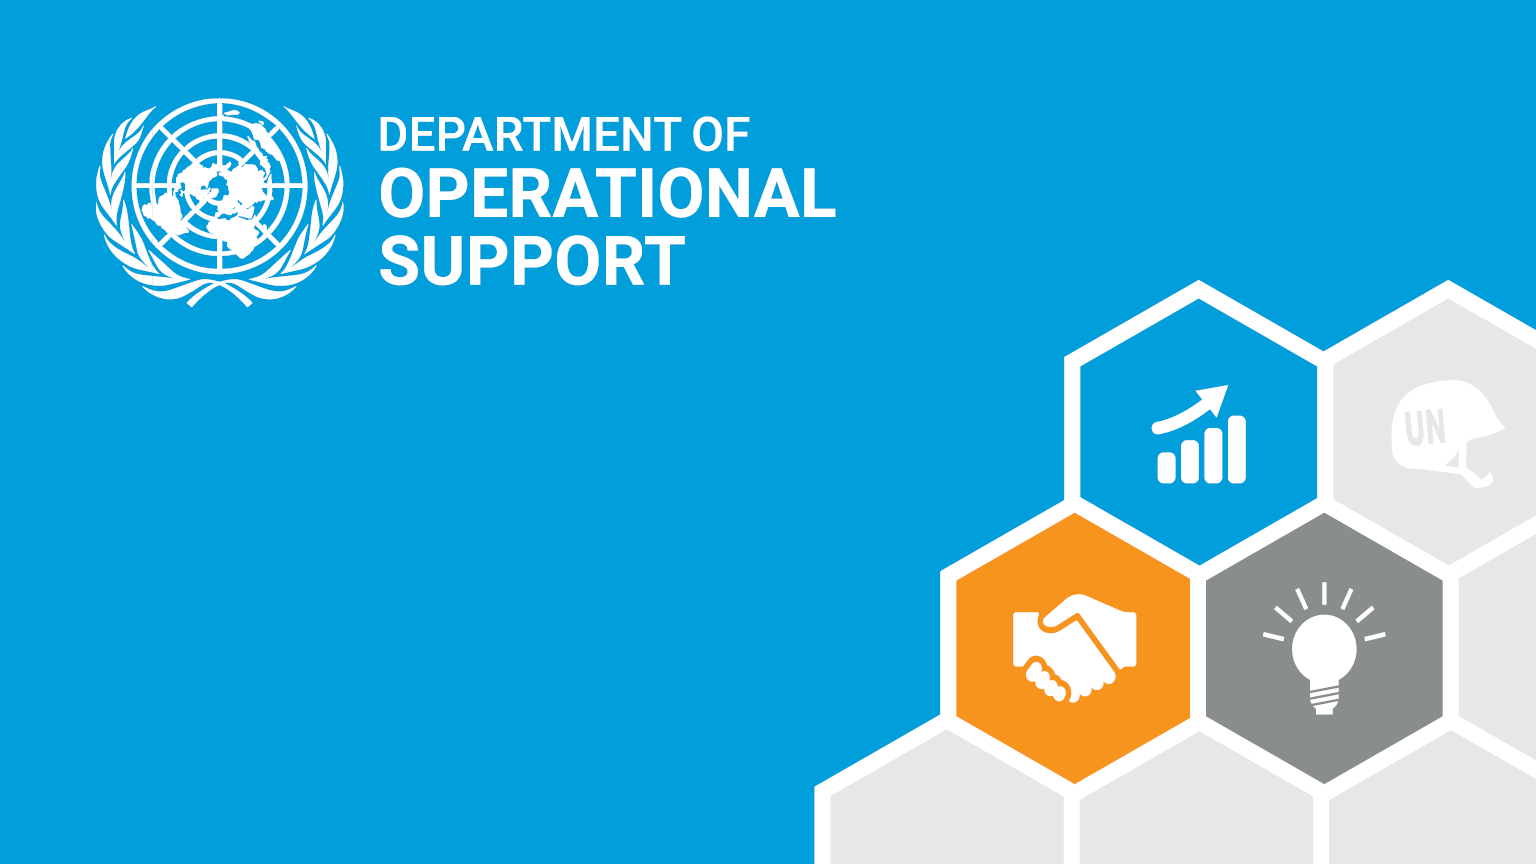 Support hub. Operations support. Фон саппорт. Support Hub картинка. Un background.